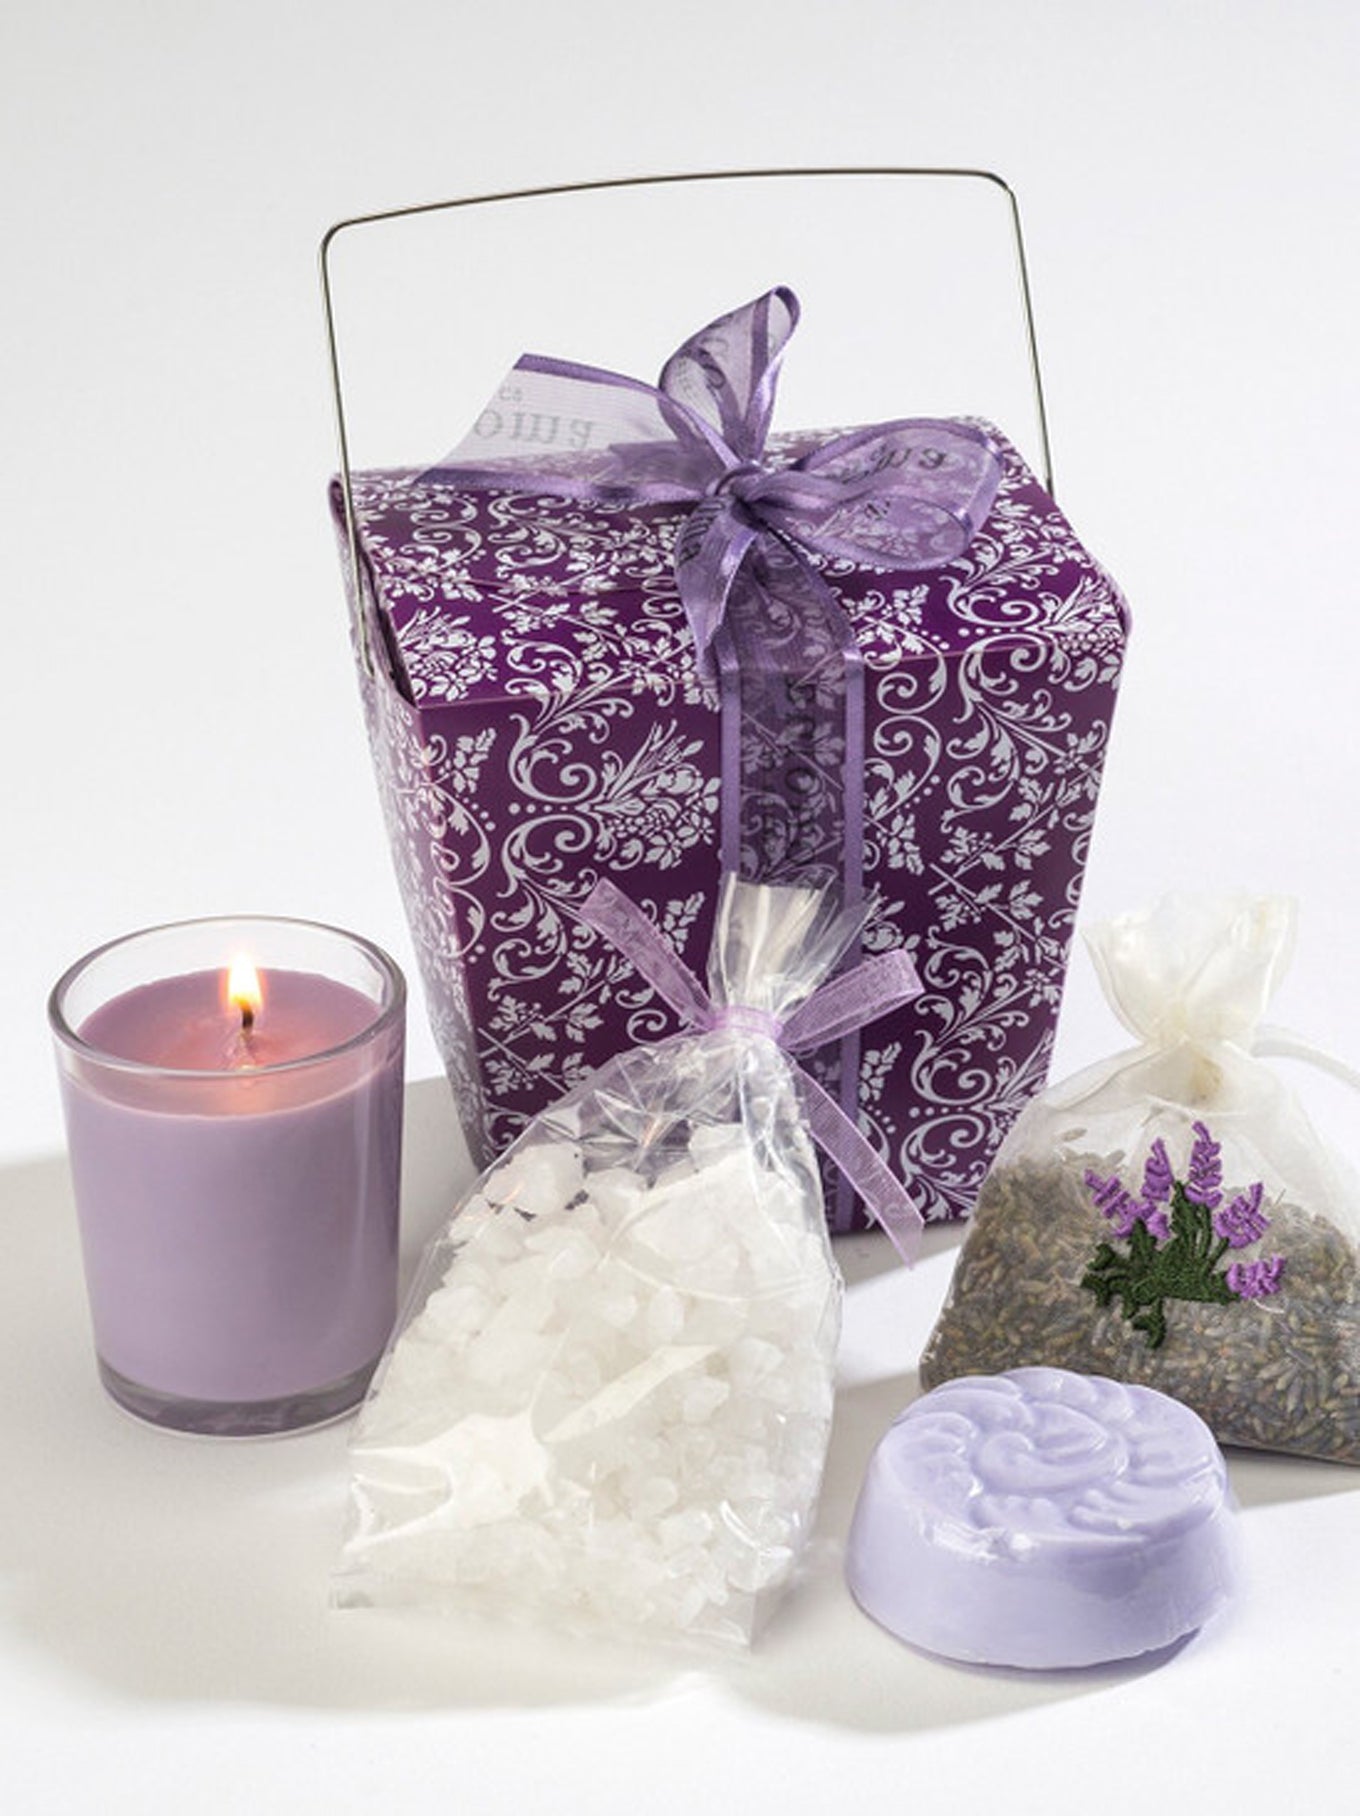 Sonoma Lavender Sachets by The Yard